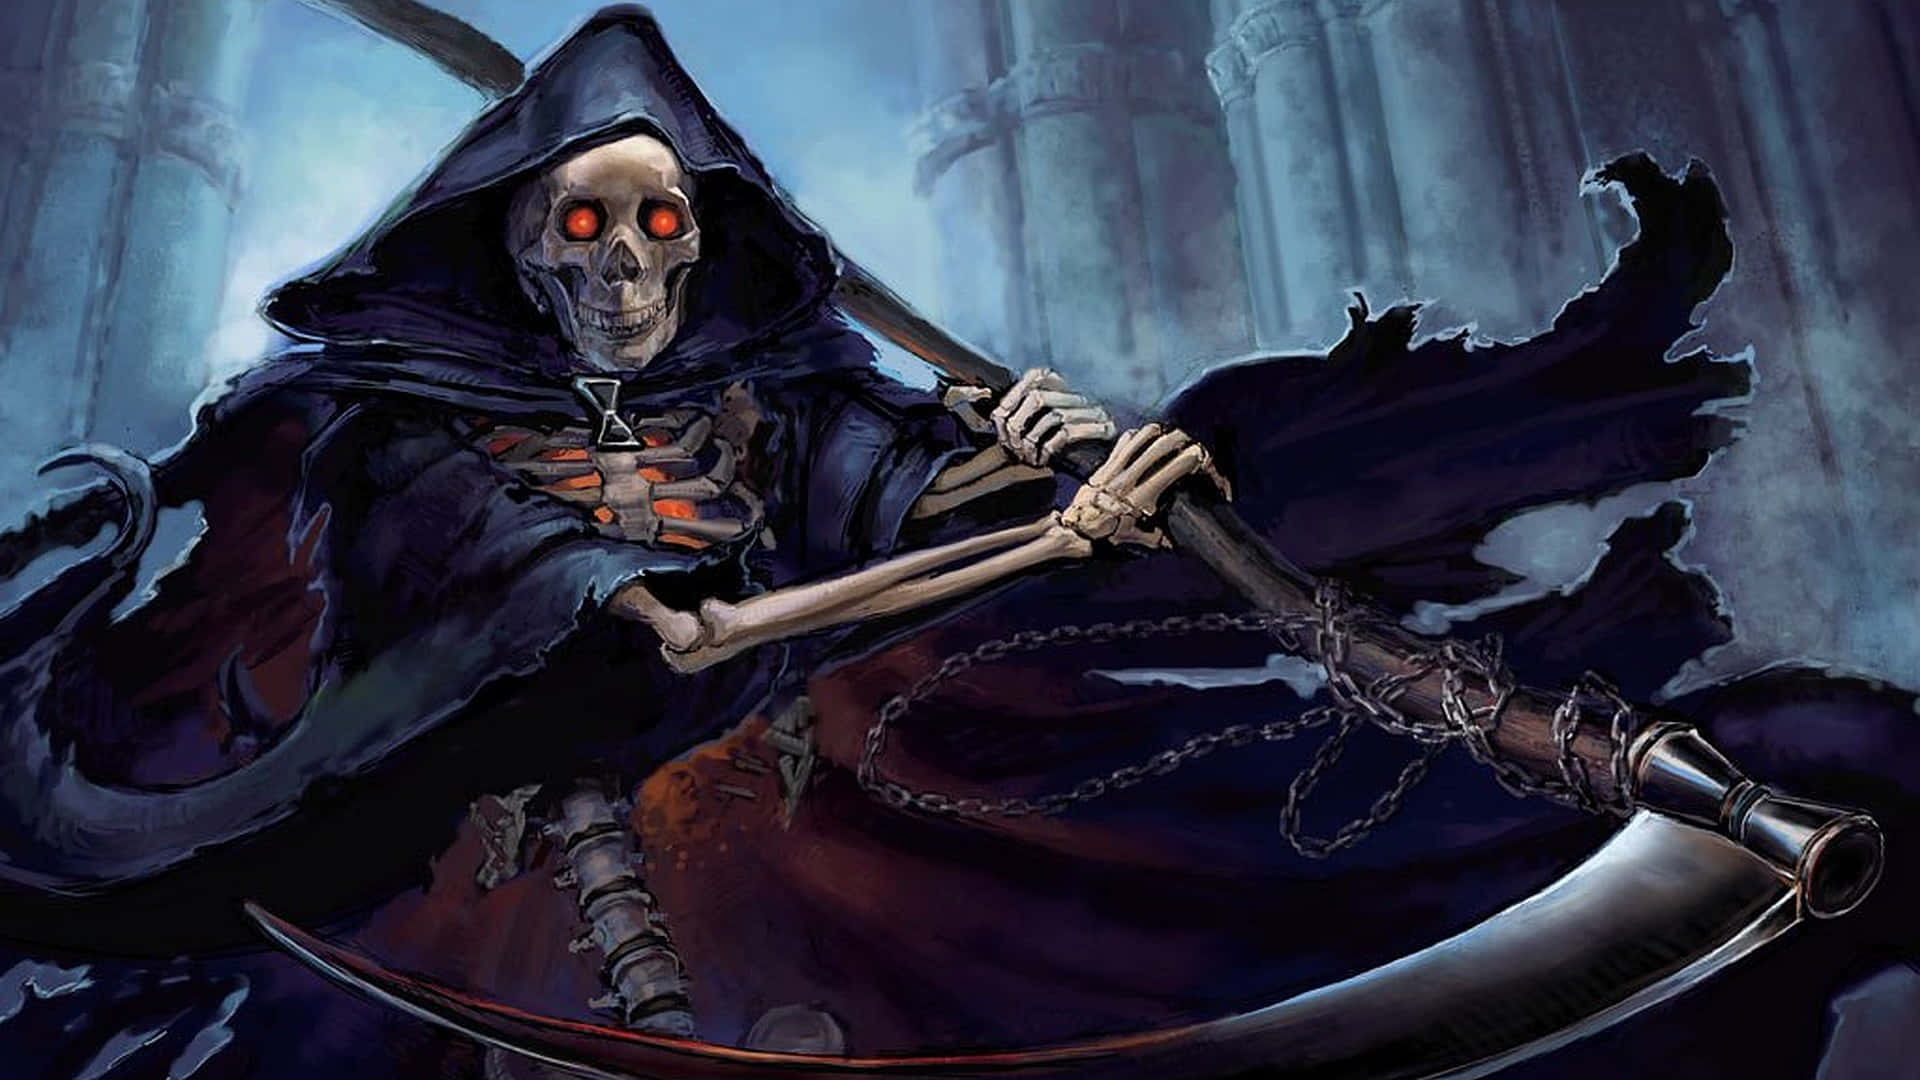 Entering Life and Exiting Death - The Grim Reaper